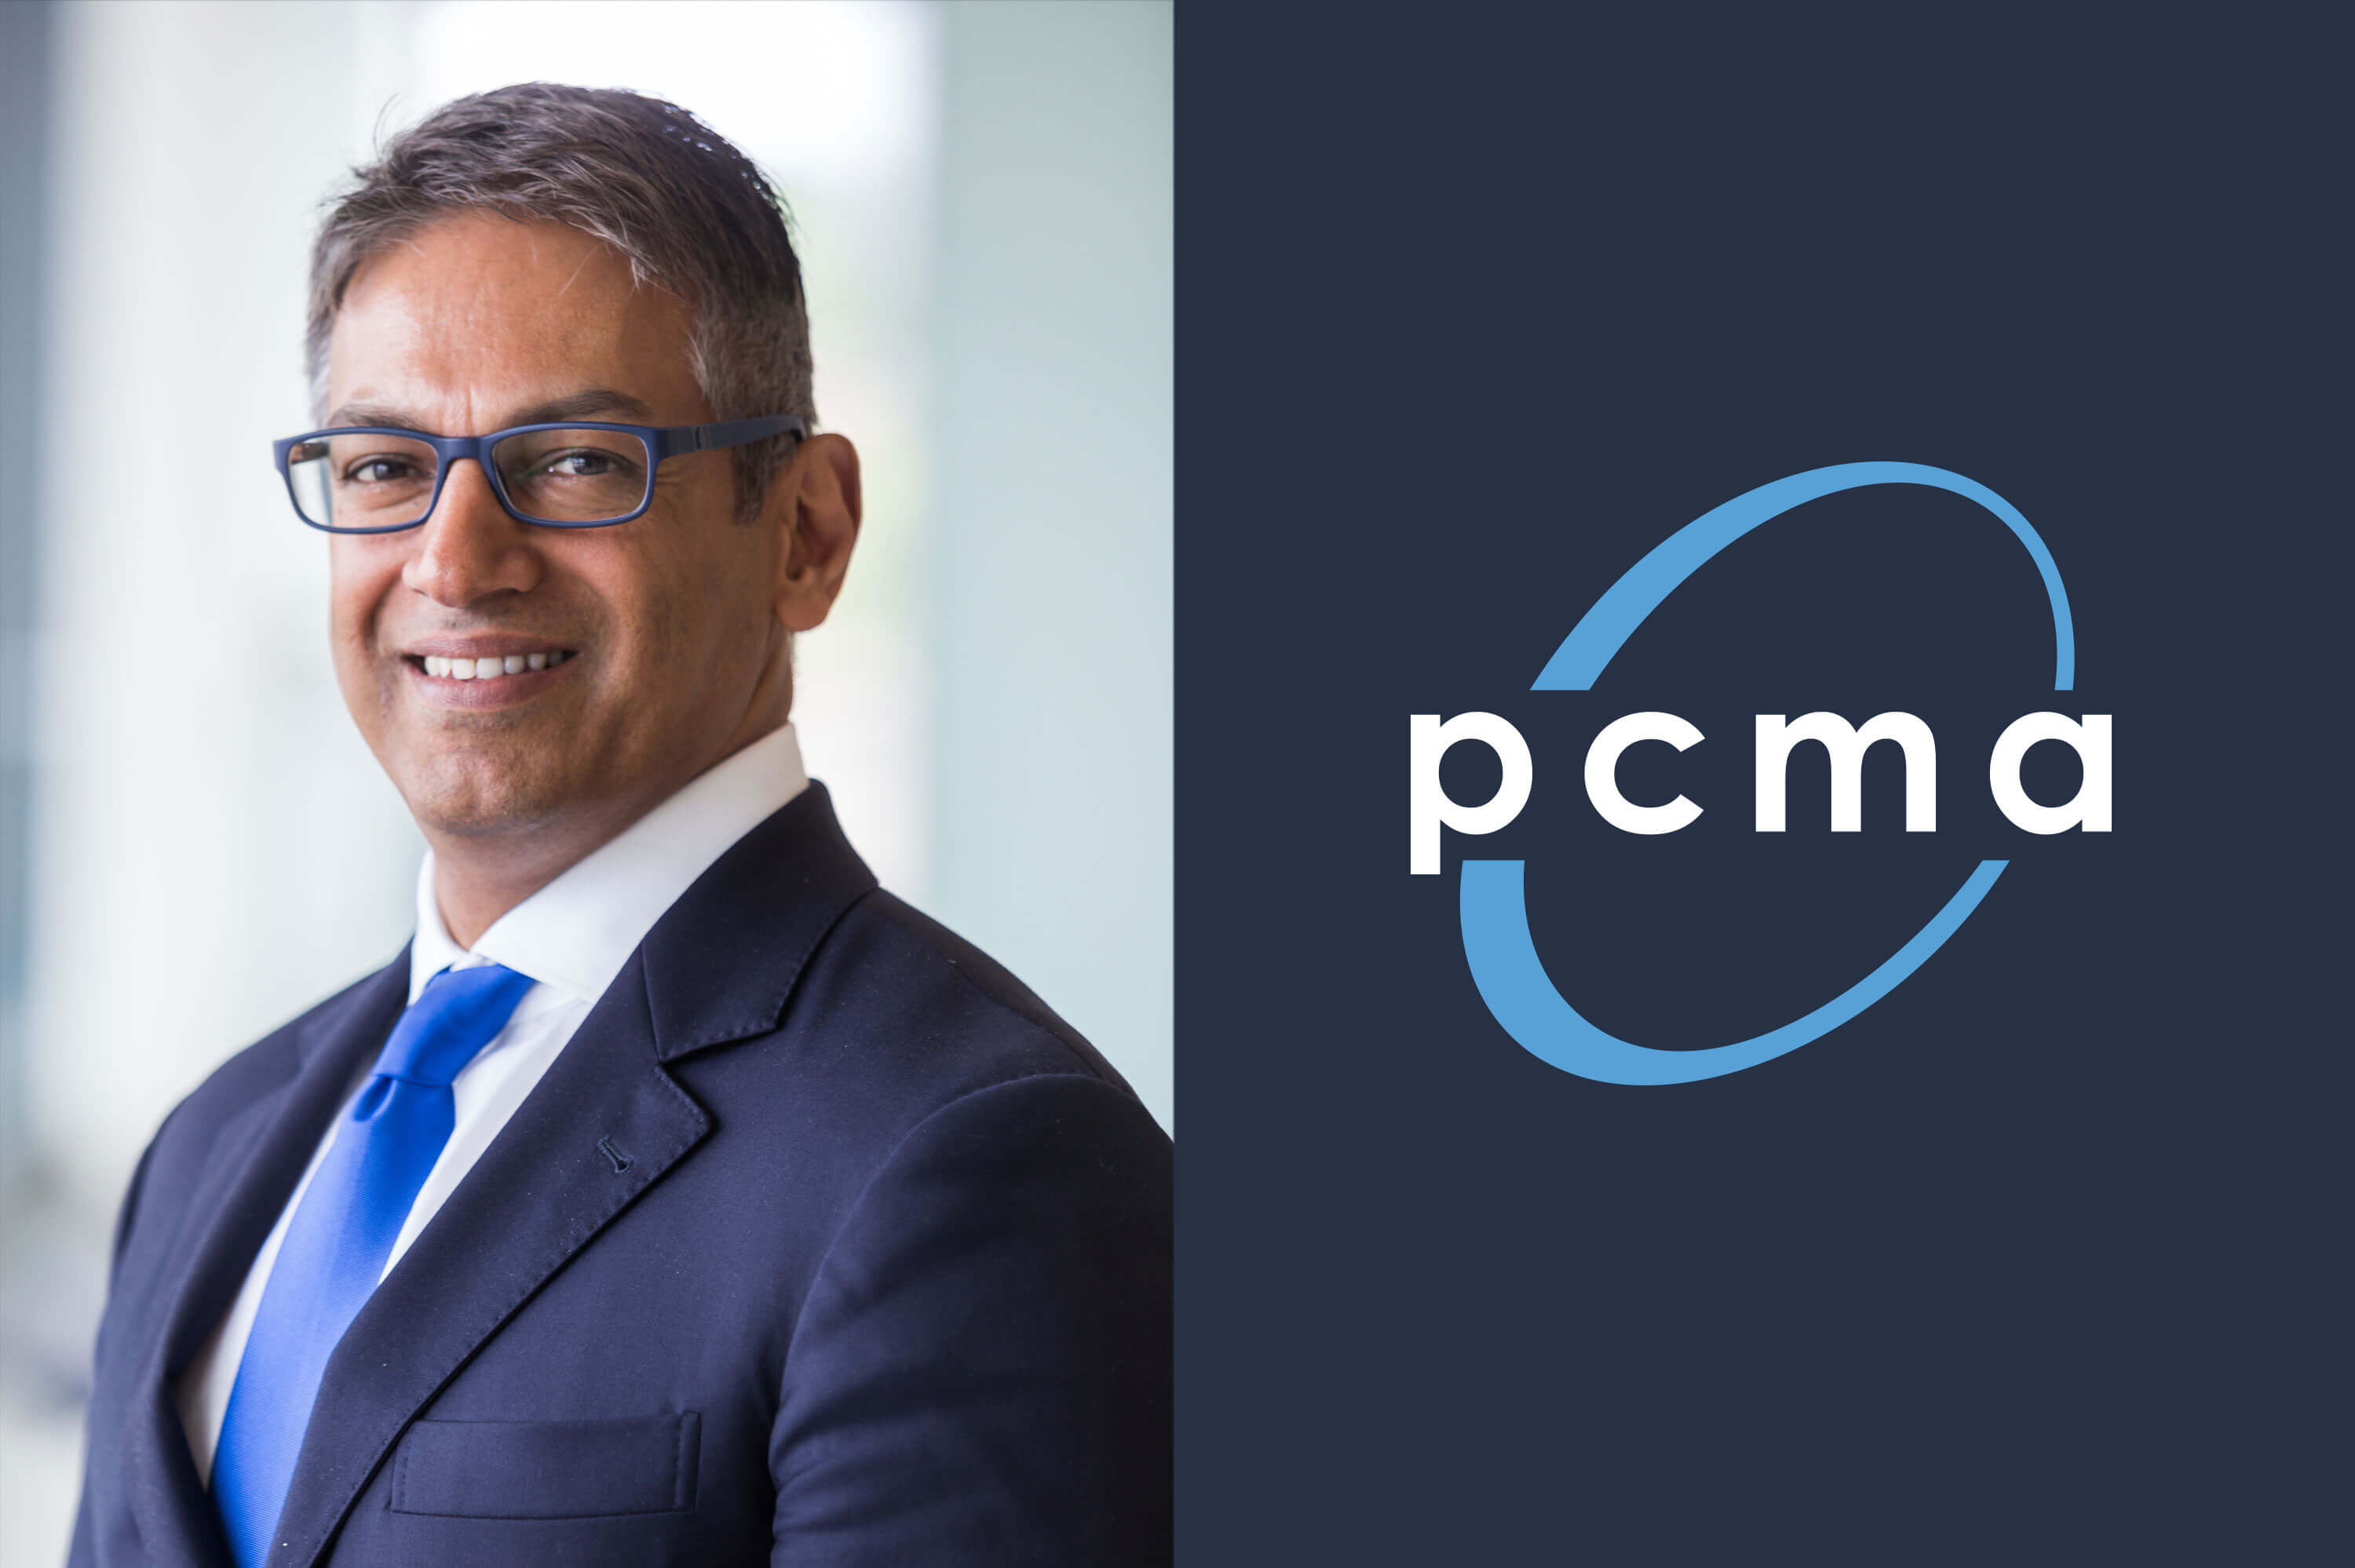 Sherrif Karamat, CAE, is President and Chief Executive Officer of PCMA. Karamat also serves as President of the PCMA Foundation and Publisher of Convene magazine. As CEO, Karamat leads the vision, mission and promise for PCMA’s global family of brands. Karamat serves the greater business events industry as a prominent business architect, enabling our community to become a catalyst for economic and social progress, organizational success, and personal and professional development.